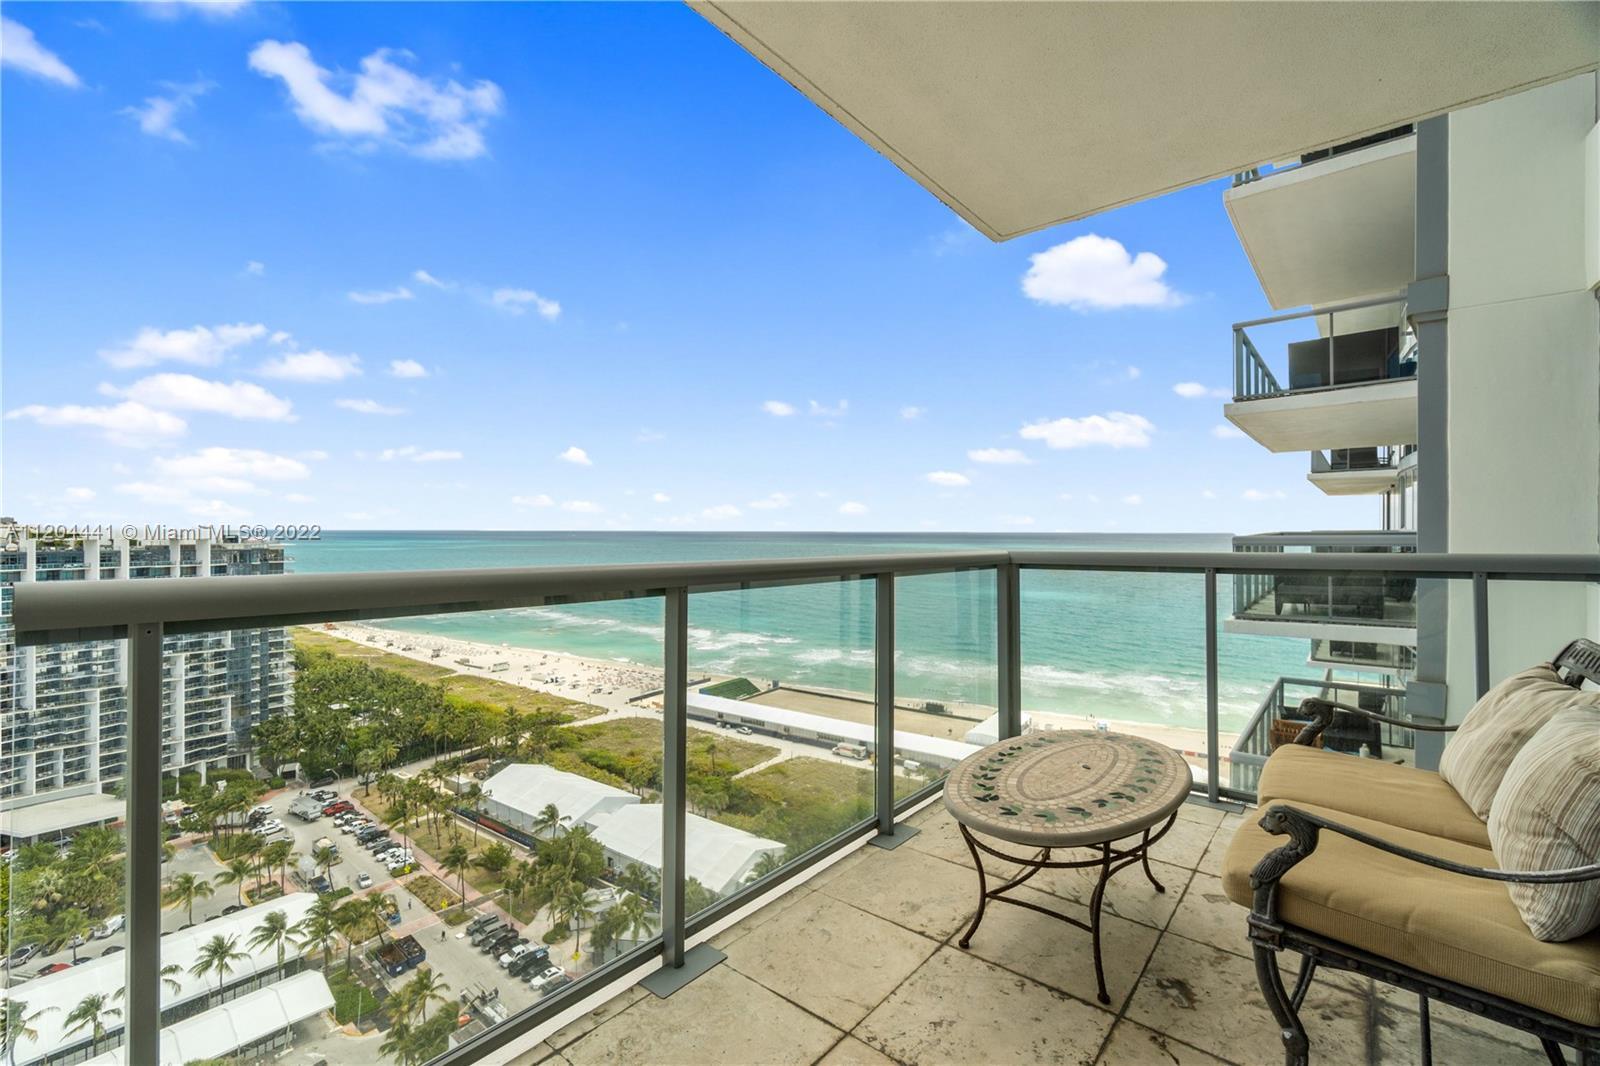 Spectacular oceanfront residence with breathtaking views of the turquoise Atlantic Ocean. This 1 bed